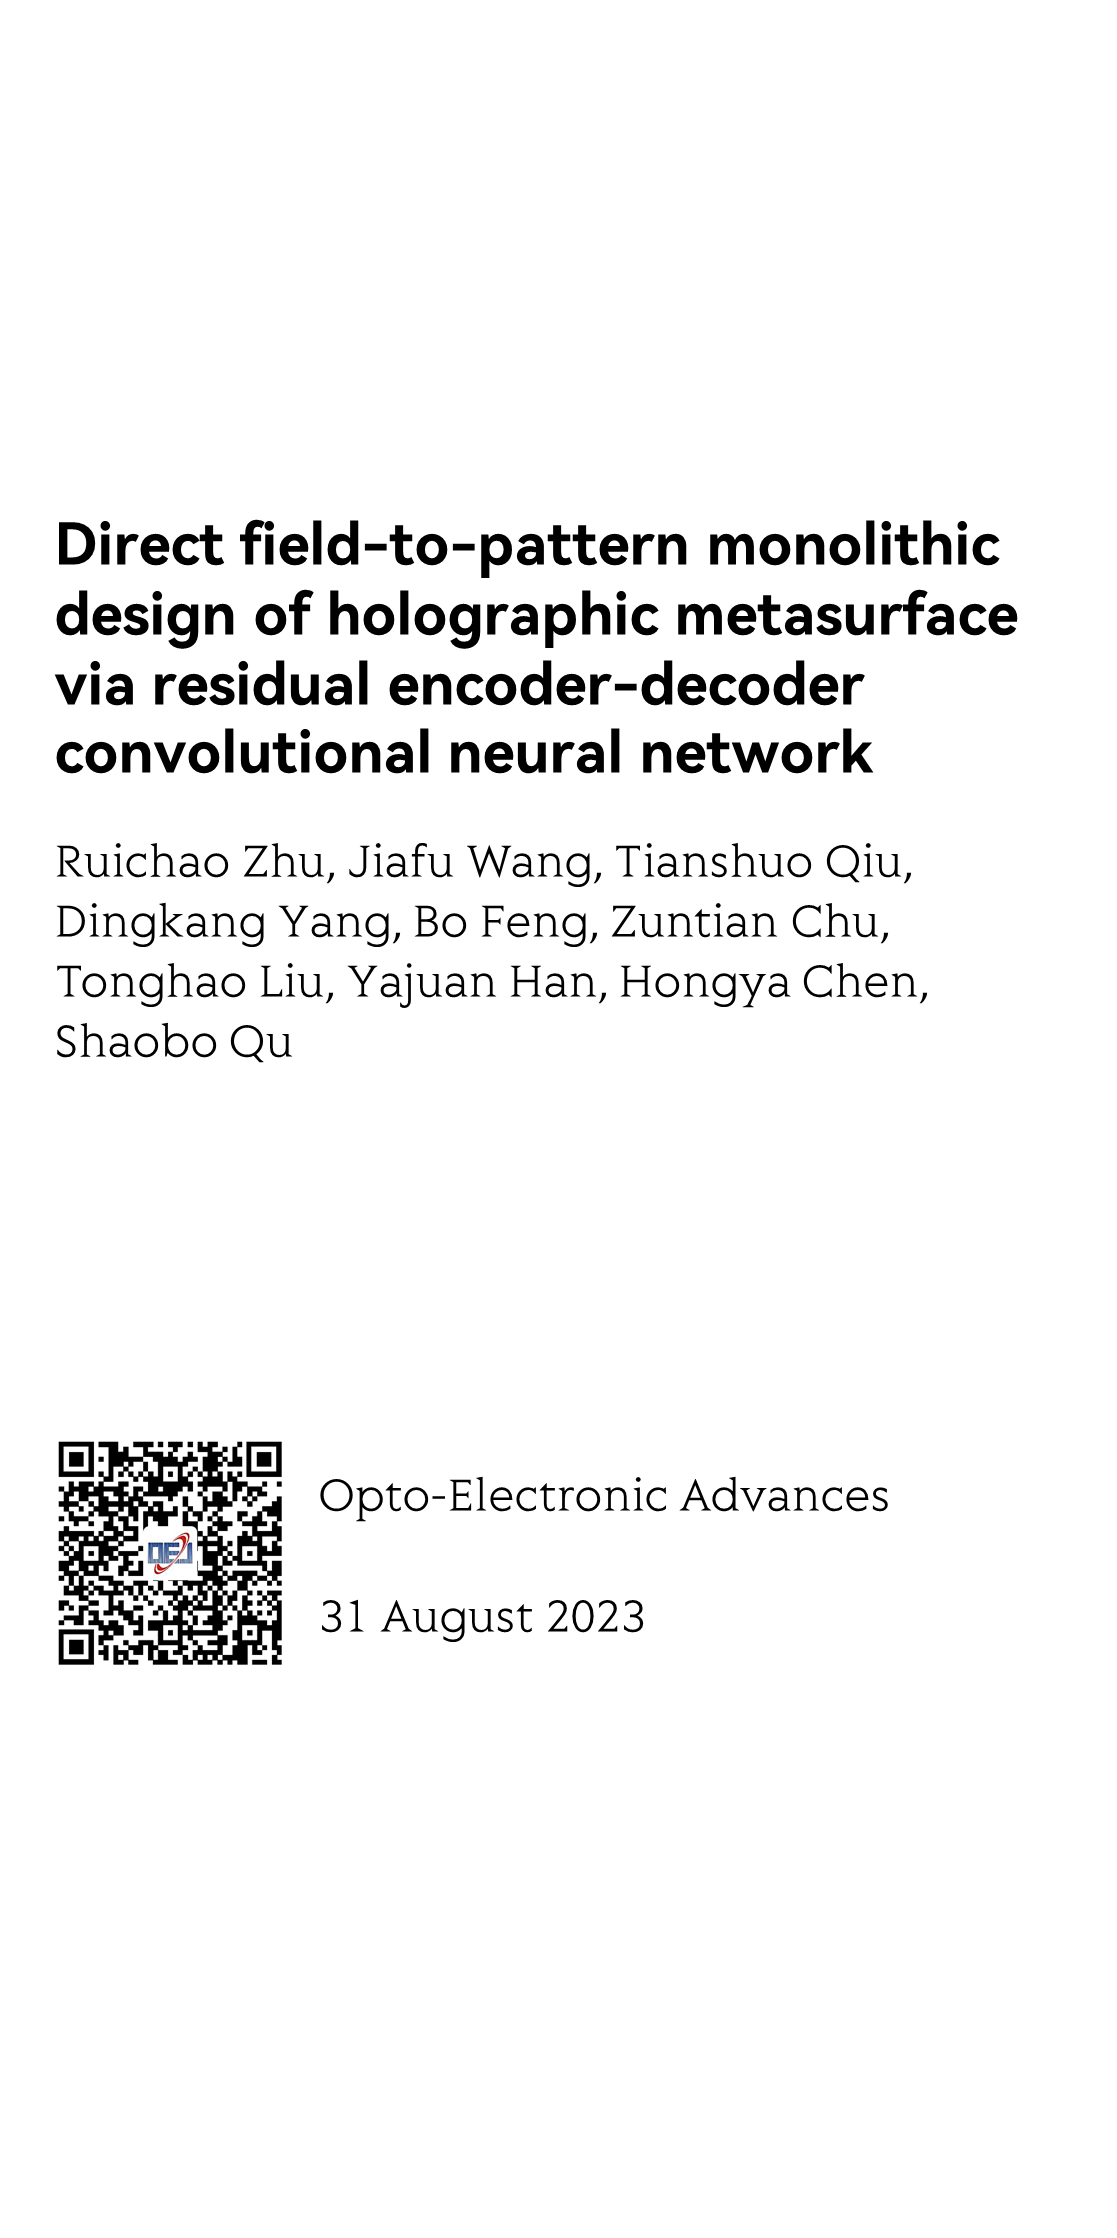 Direct field-to-pattern monolithic design of holographic metasurface via residual encoder-decoder convolutional neural network_1